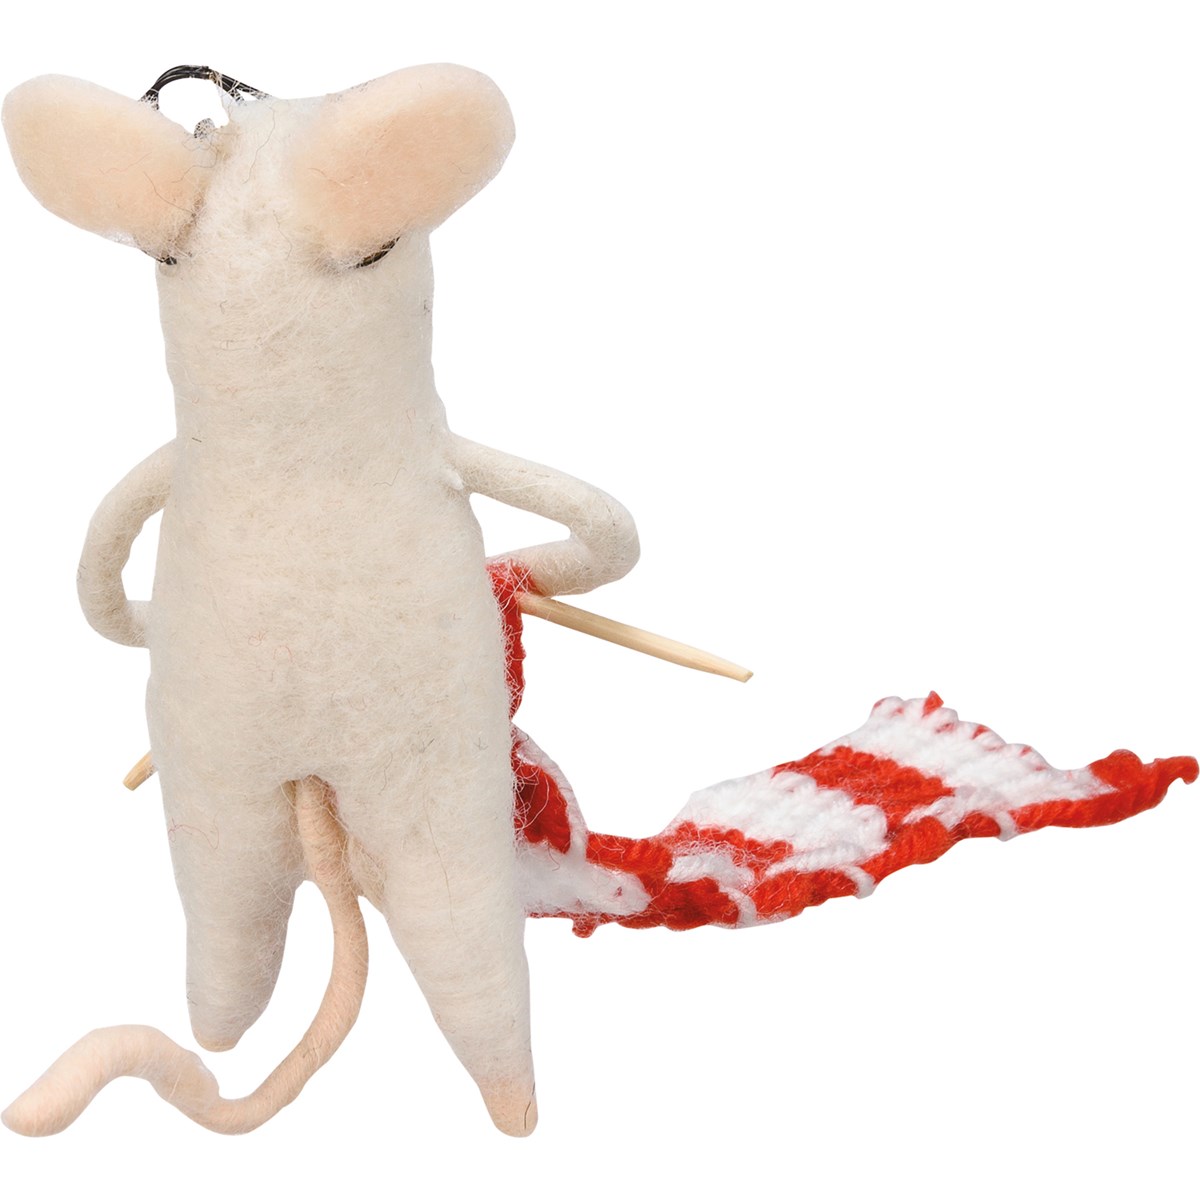 Knitting Mouse Critter - Wool, Polyester, Plastic, Wood, Wire